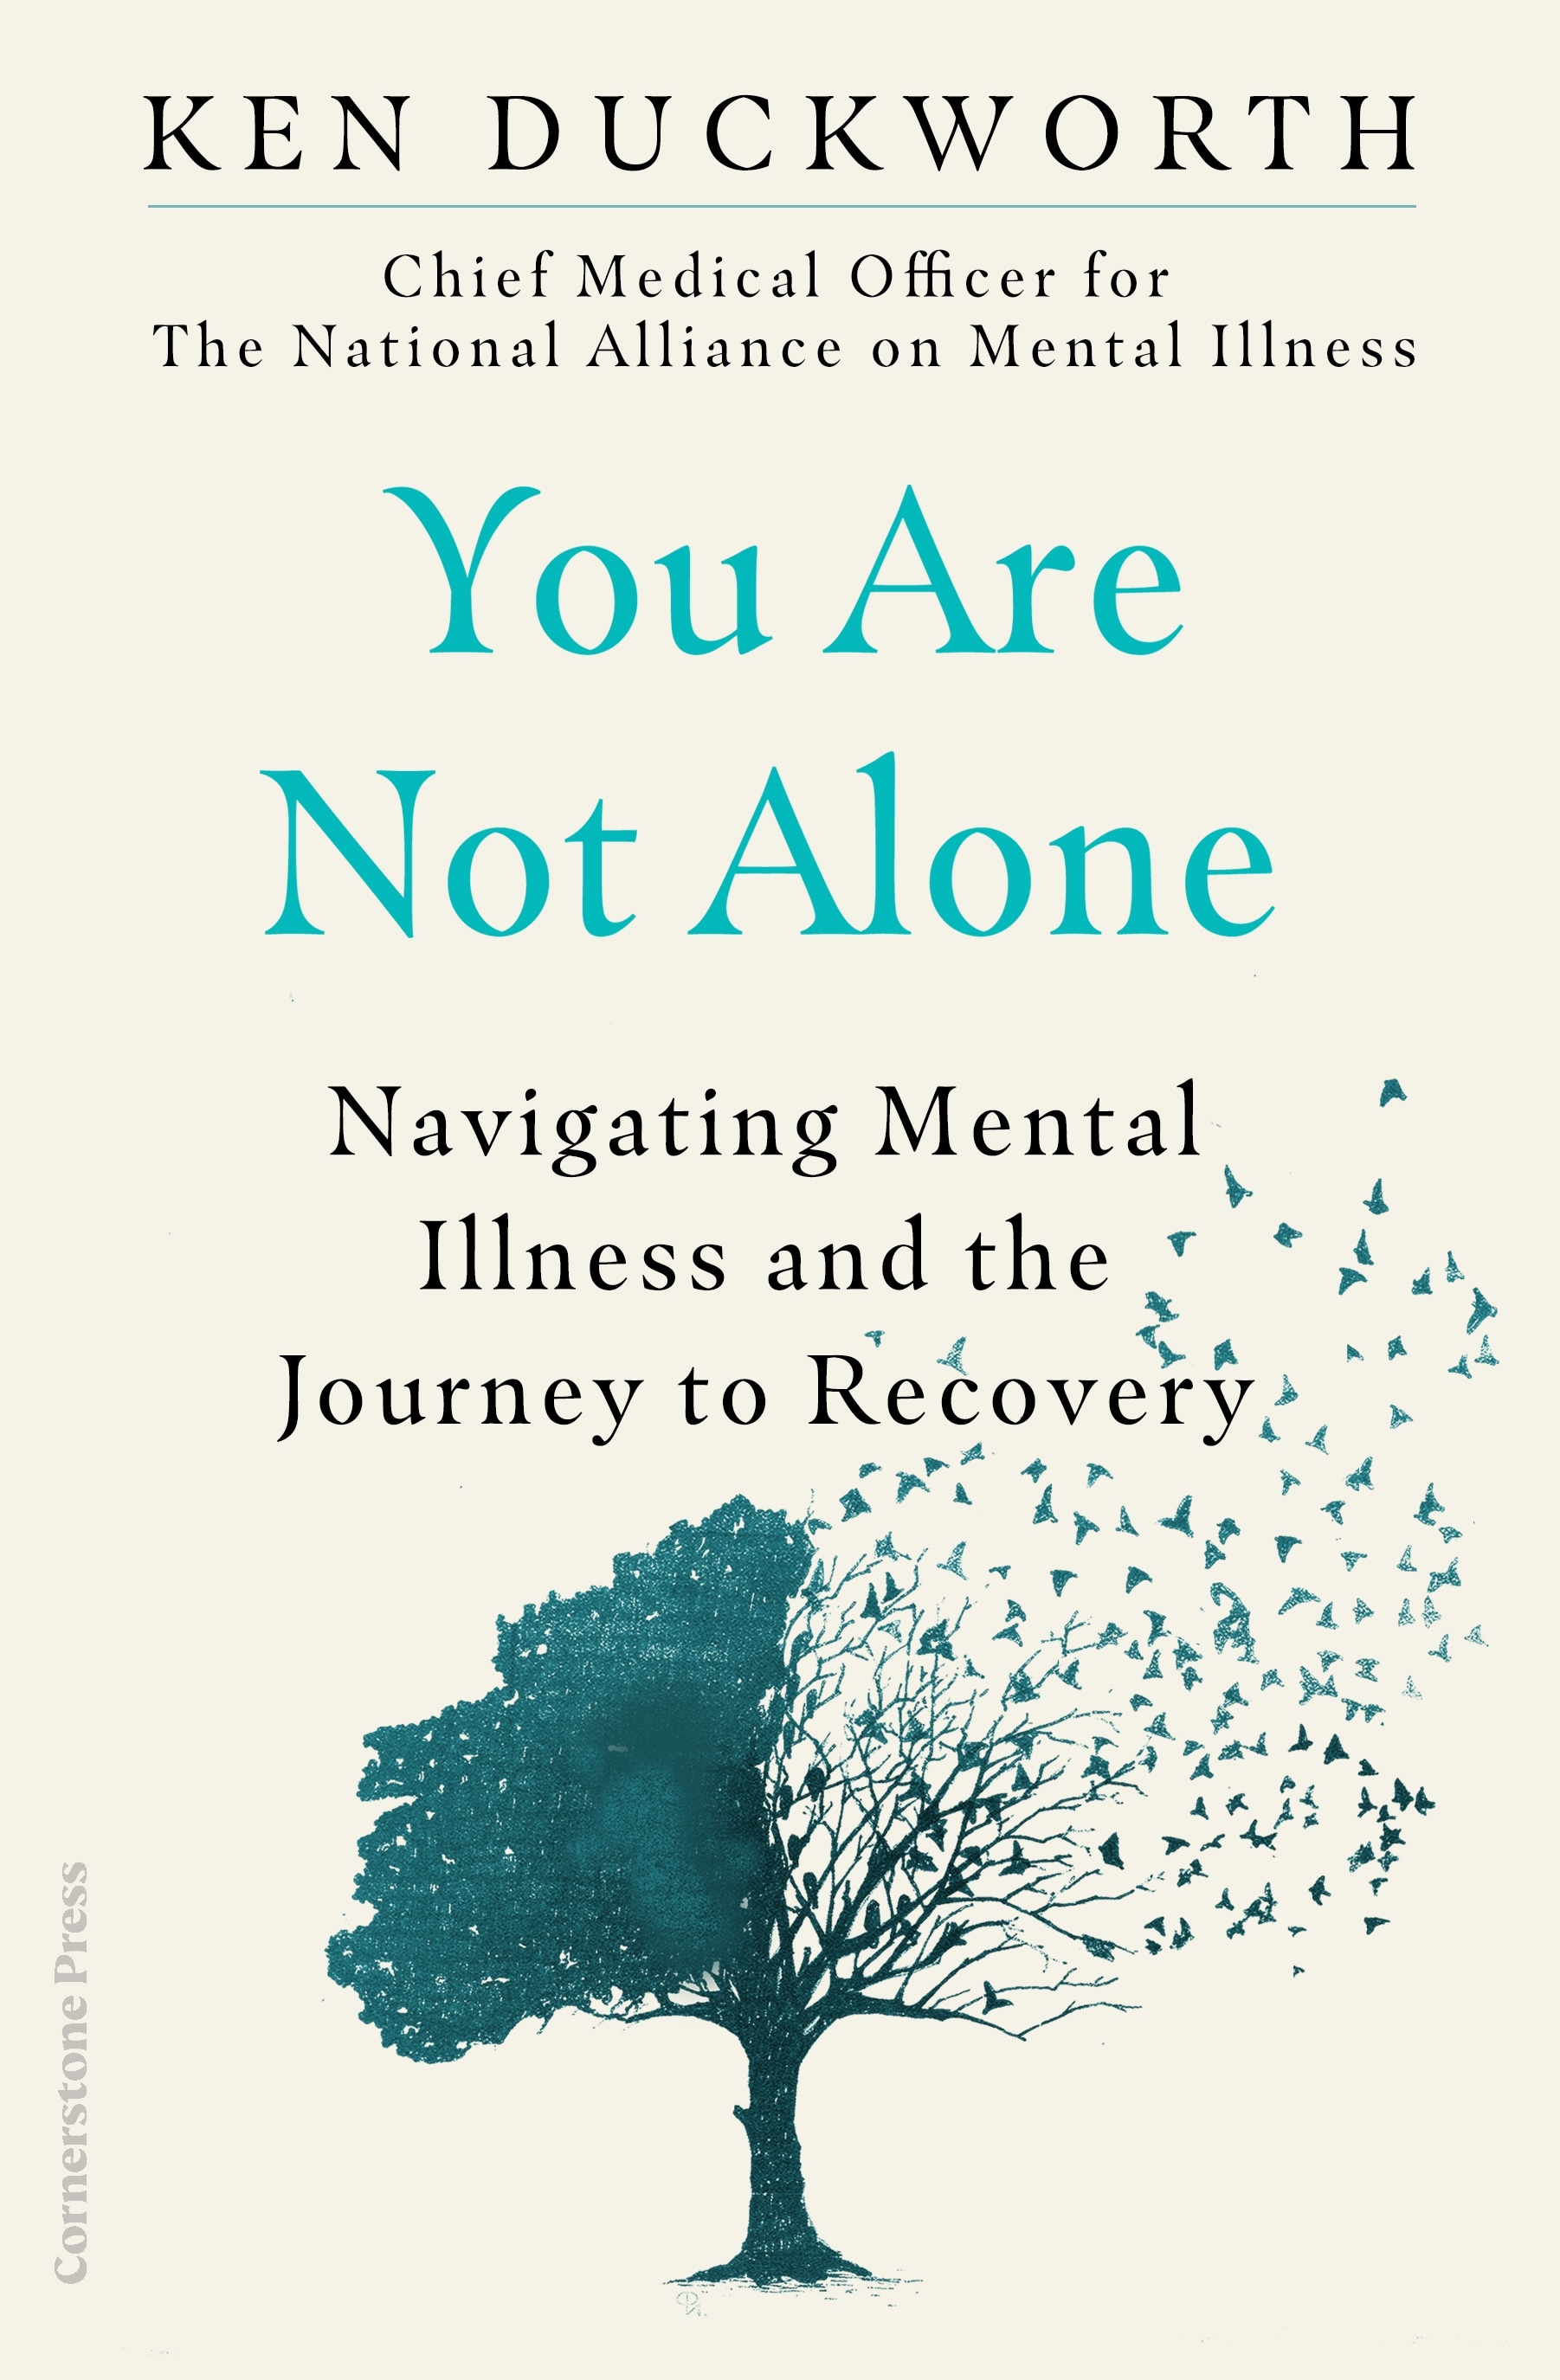 Book “You Are Not Alone” by Ken Duckworth — February 9, 2023